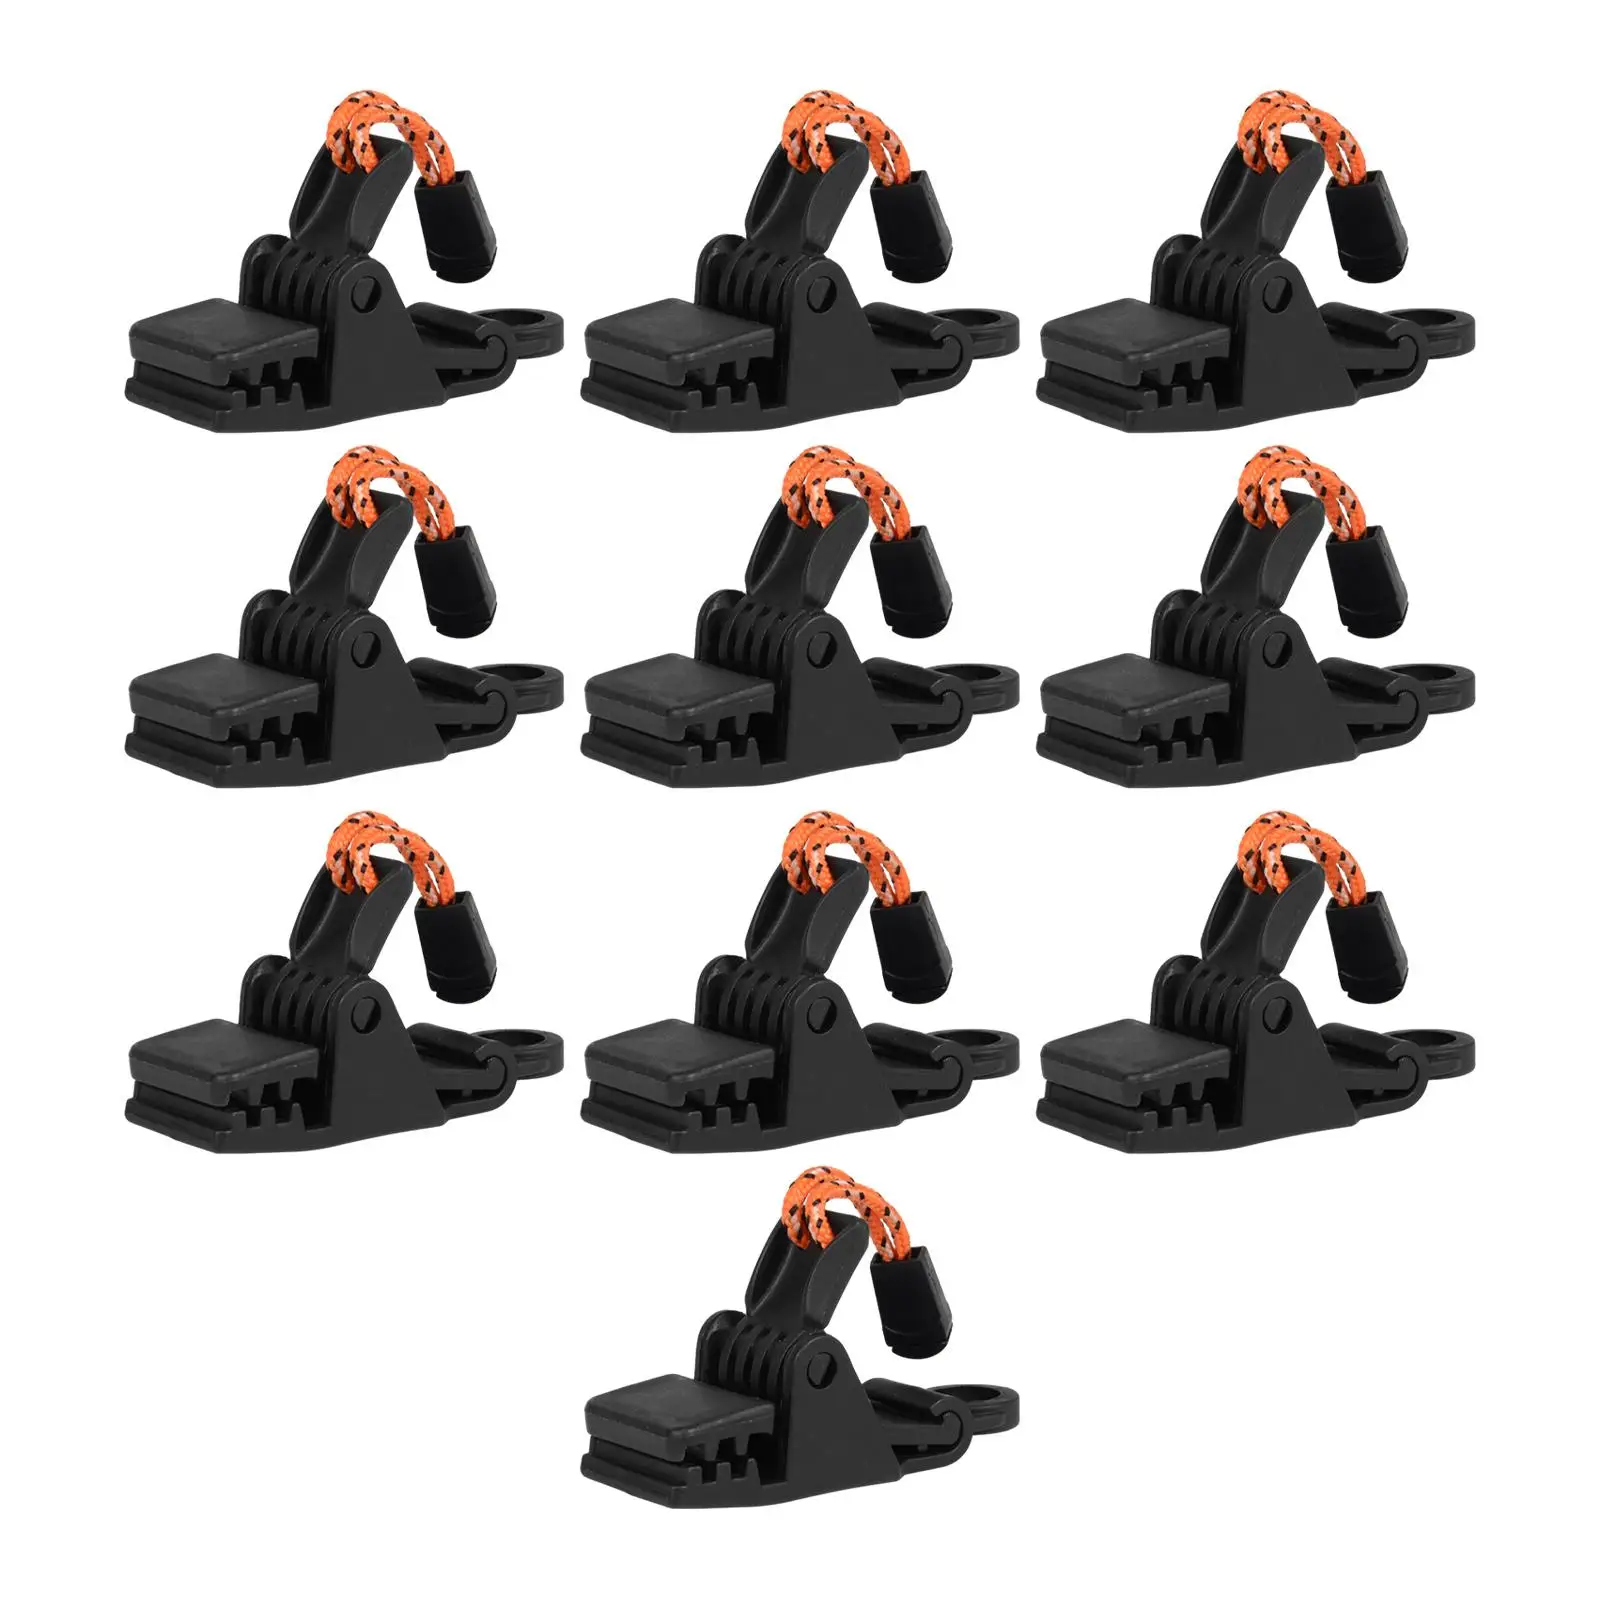 10x Tarp Clips Portable Sturdy Awning Clamps for Boat Cover Fixing Canopies